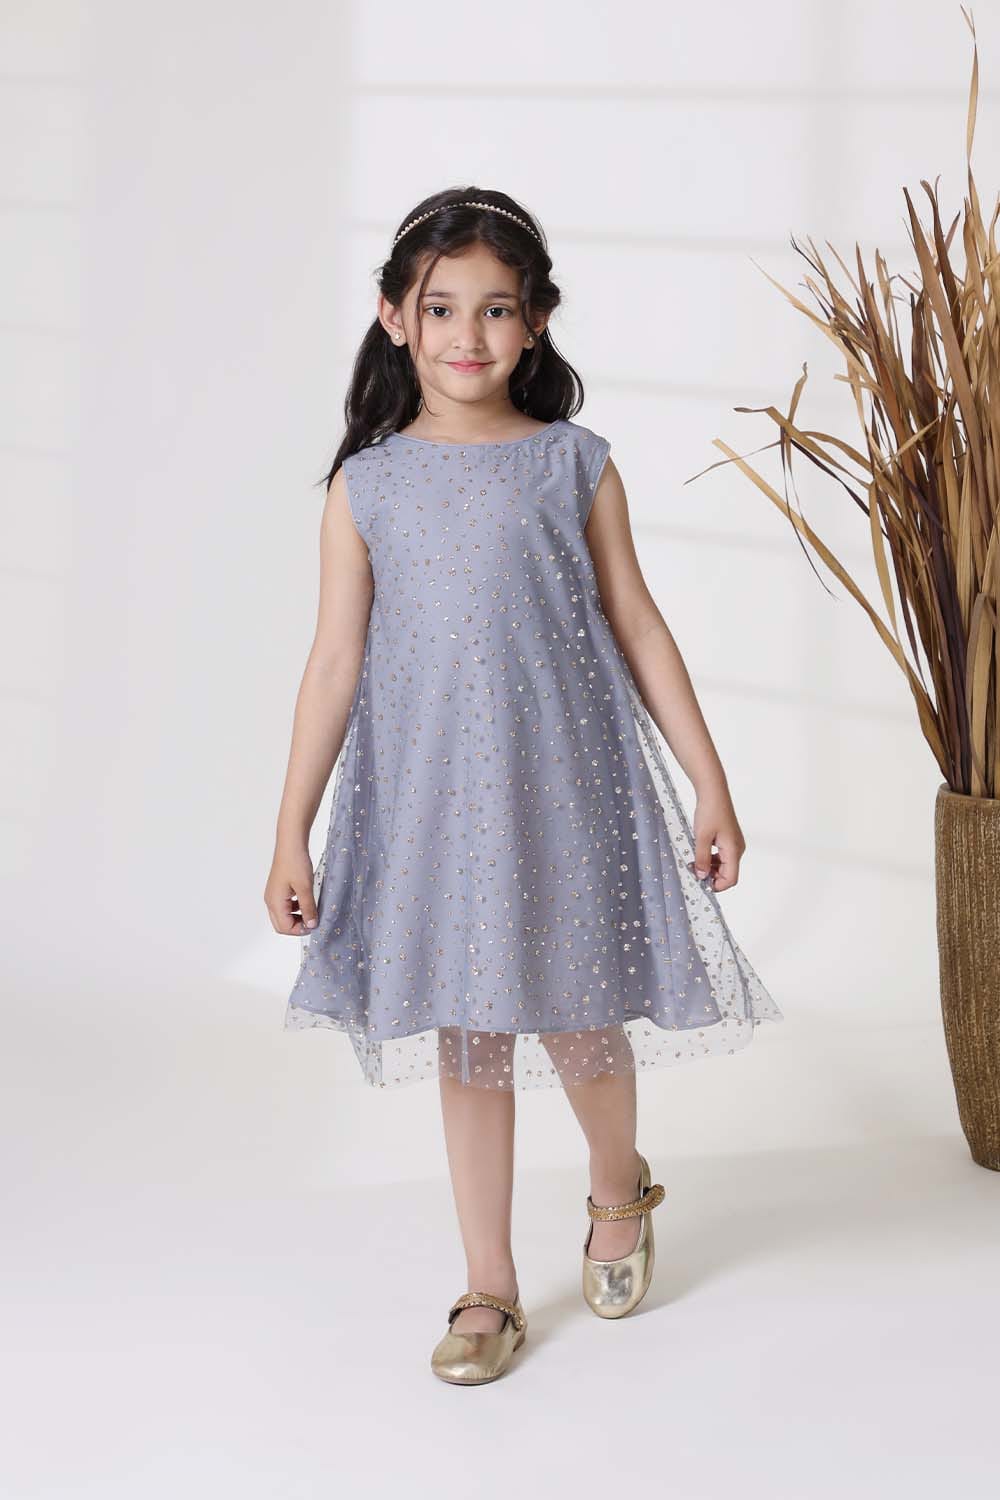 Hope Not Out by Shahid Afridi Eastern Girls Tops Kids Flora Net A-Line Shirt